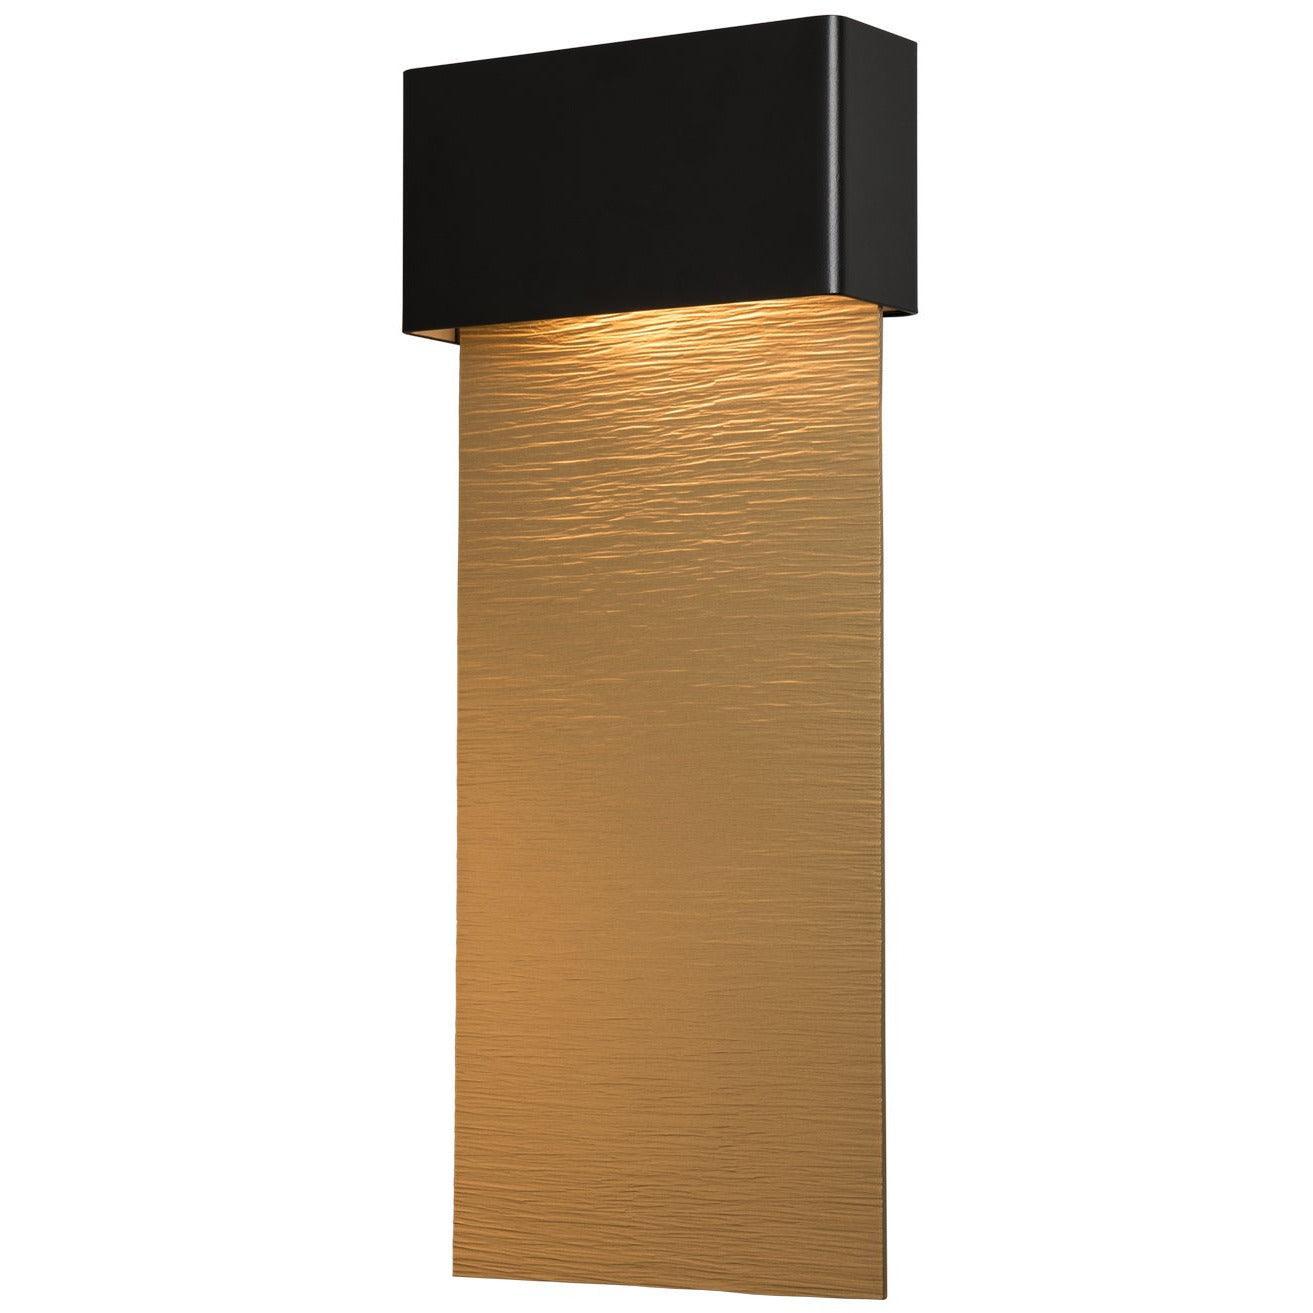 Hubbardton Forge - Stratum 21-Inch LED Outdoor Wall Sconce - 302632-LED-10-70 | Montreal Lighting & Hardware